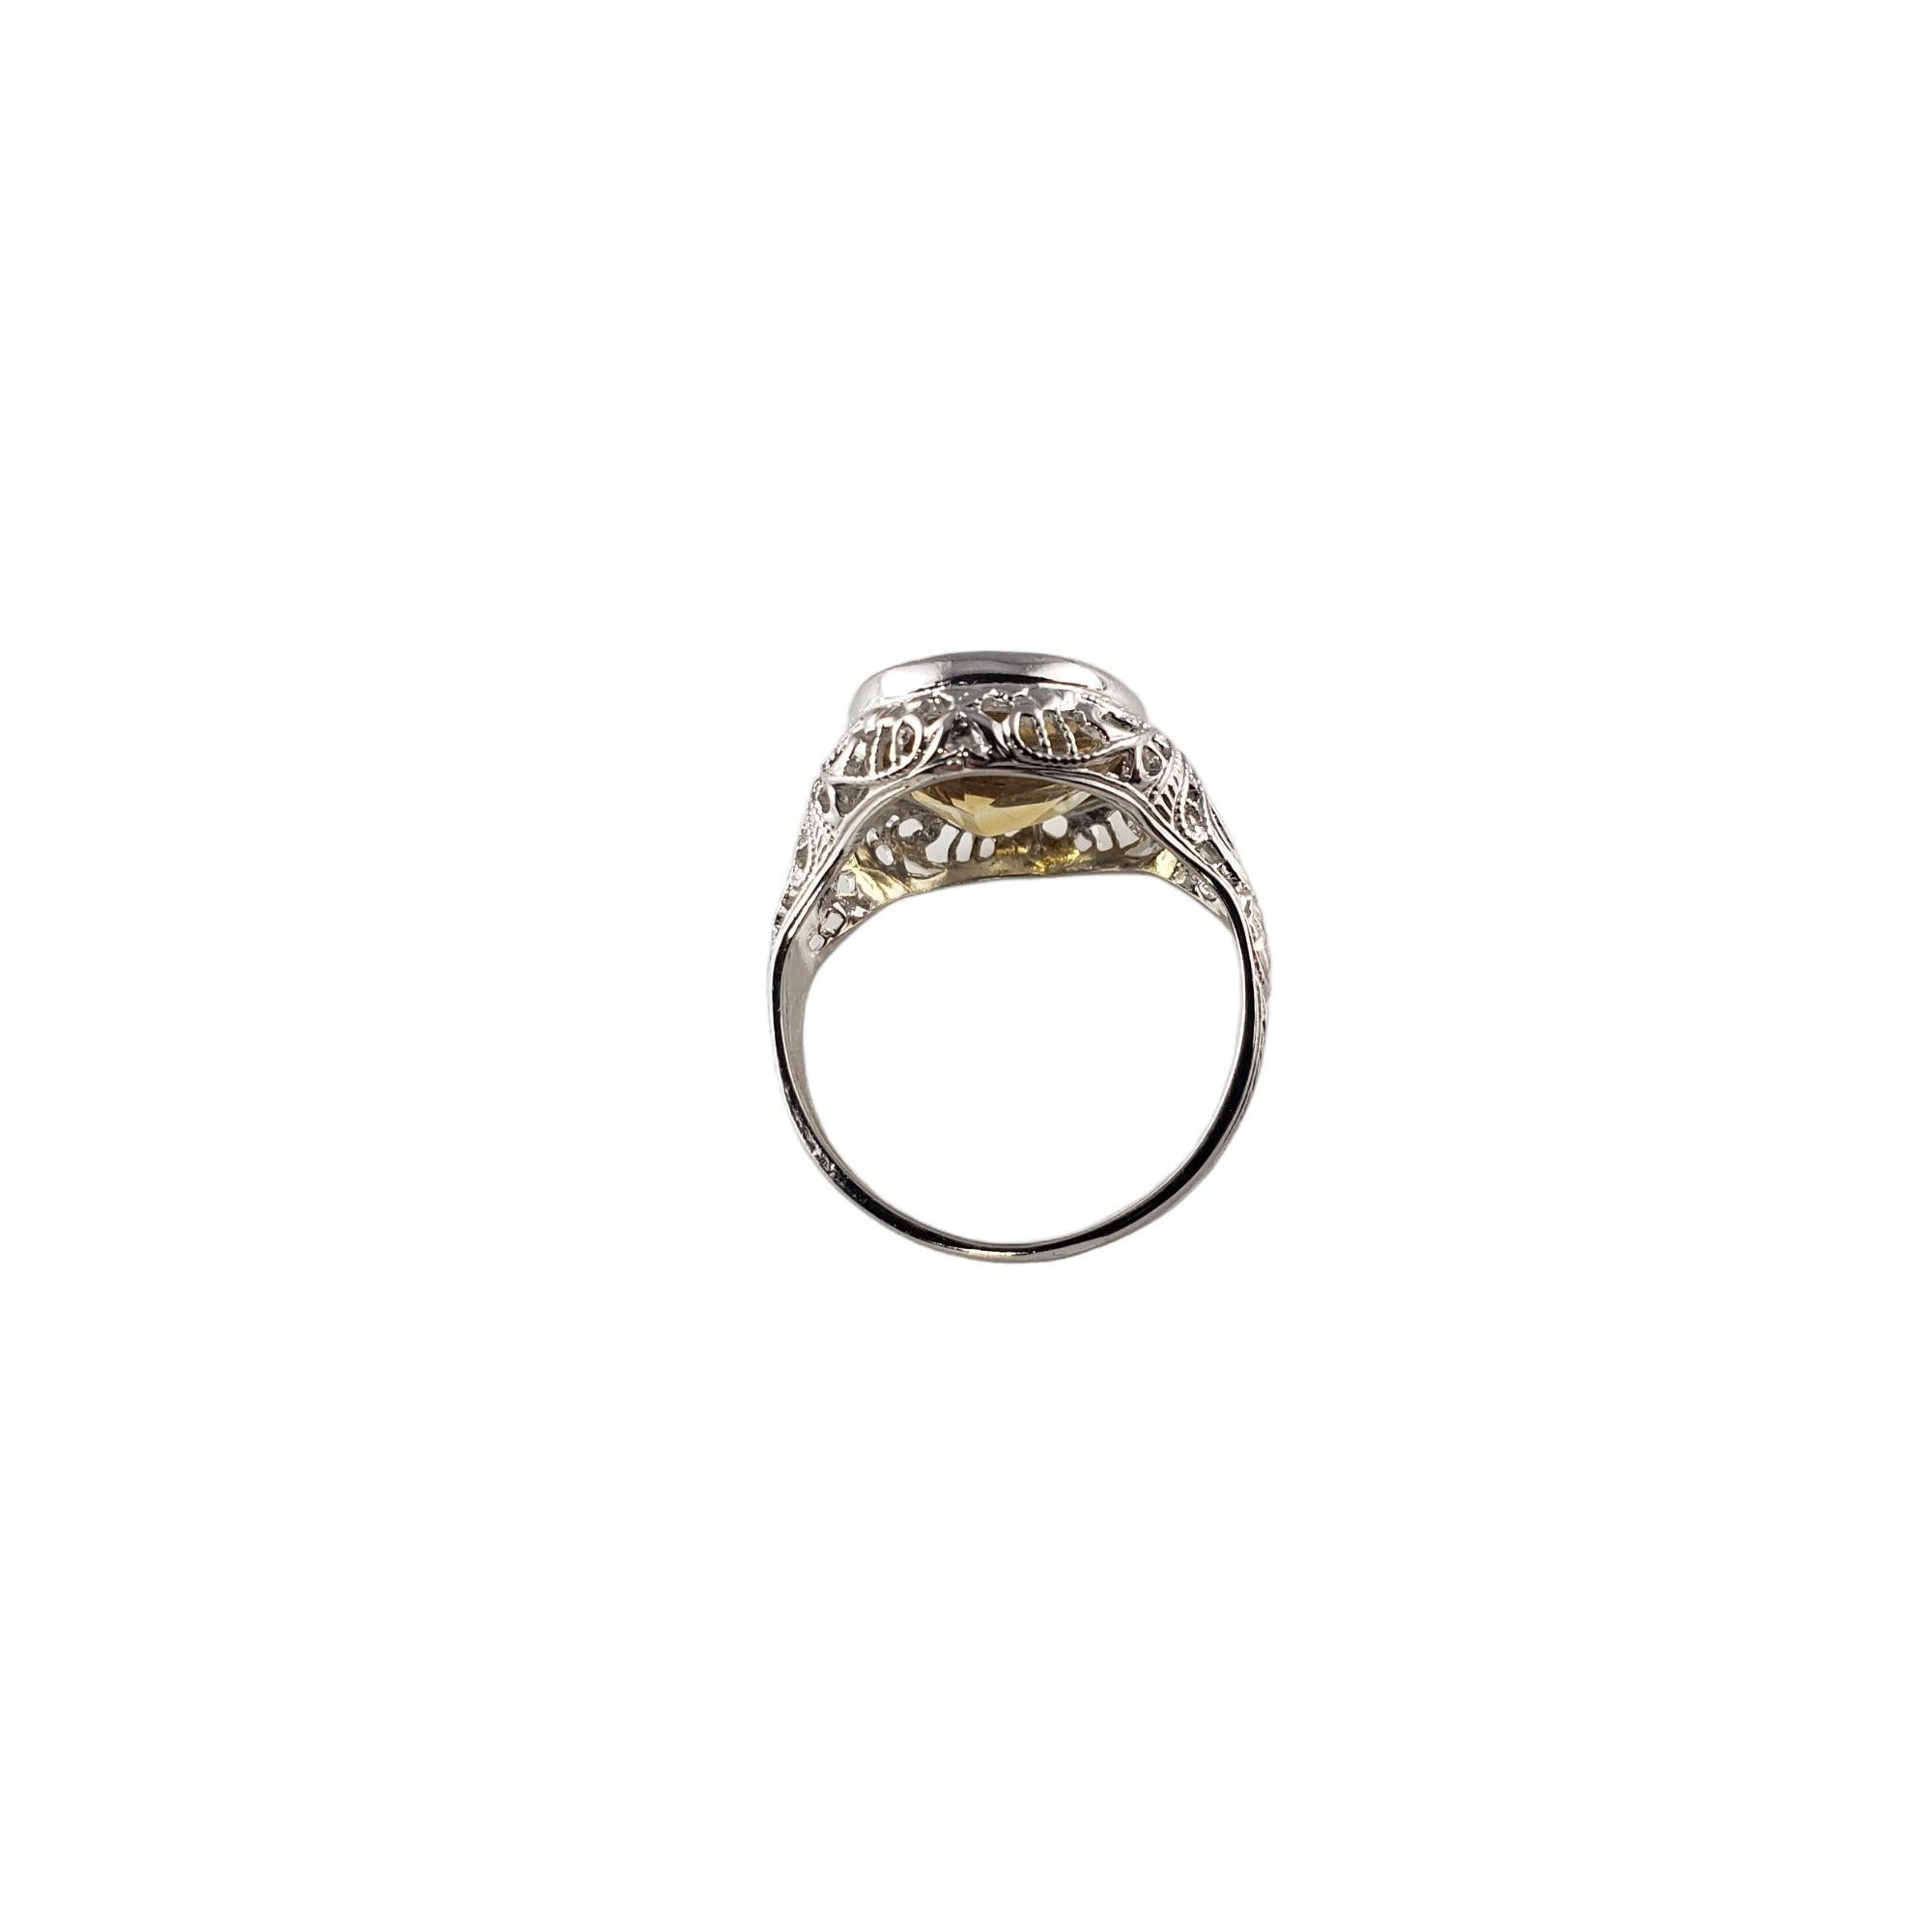 10 Karat White Gold and Citrine Ring Size 3.5 #14209 For Sale 3